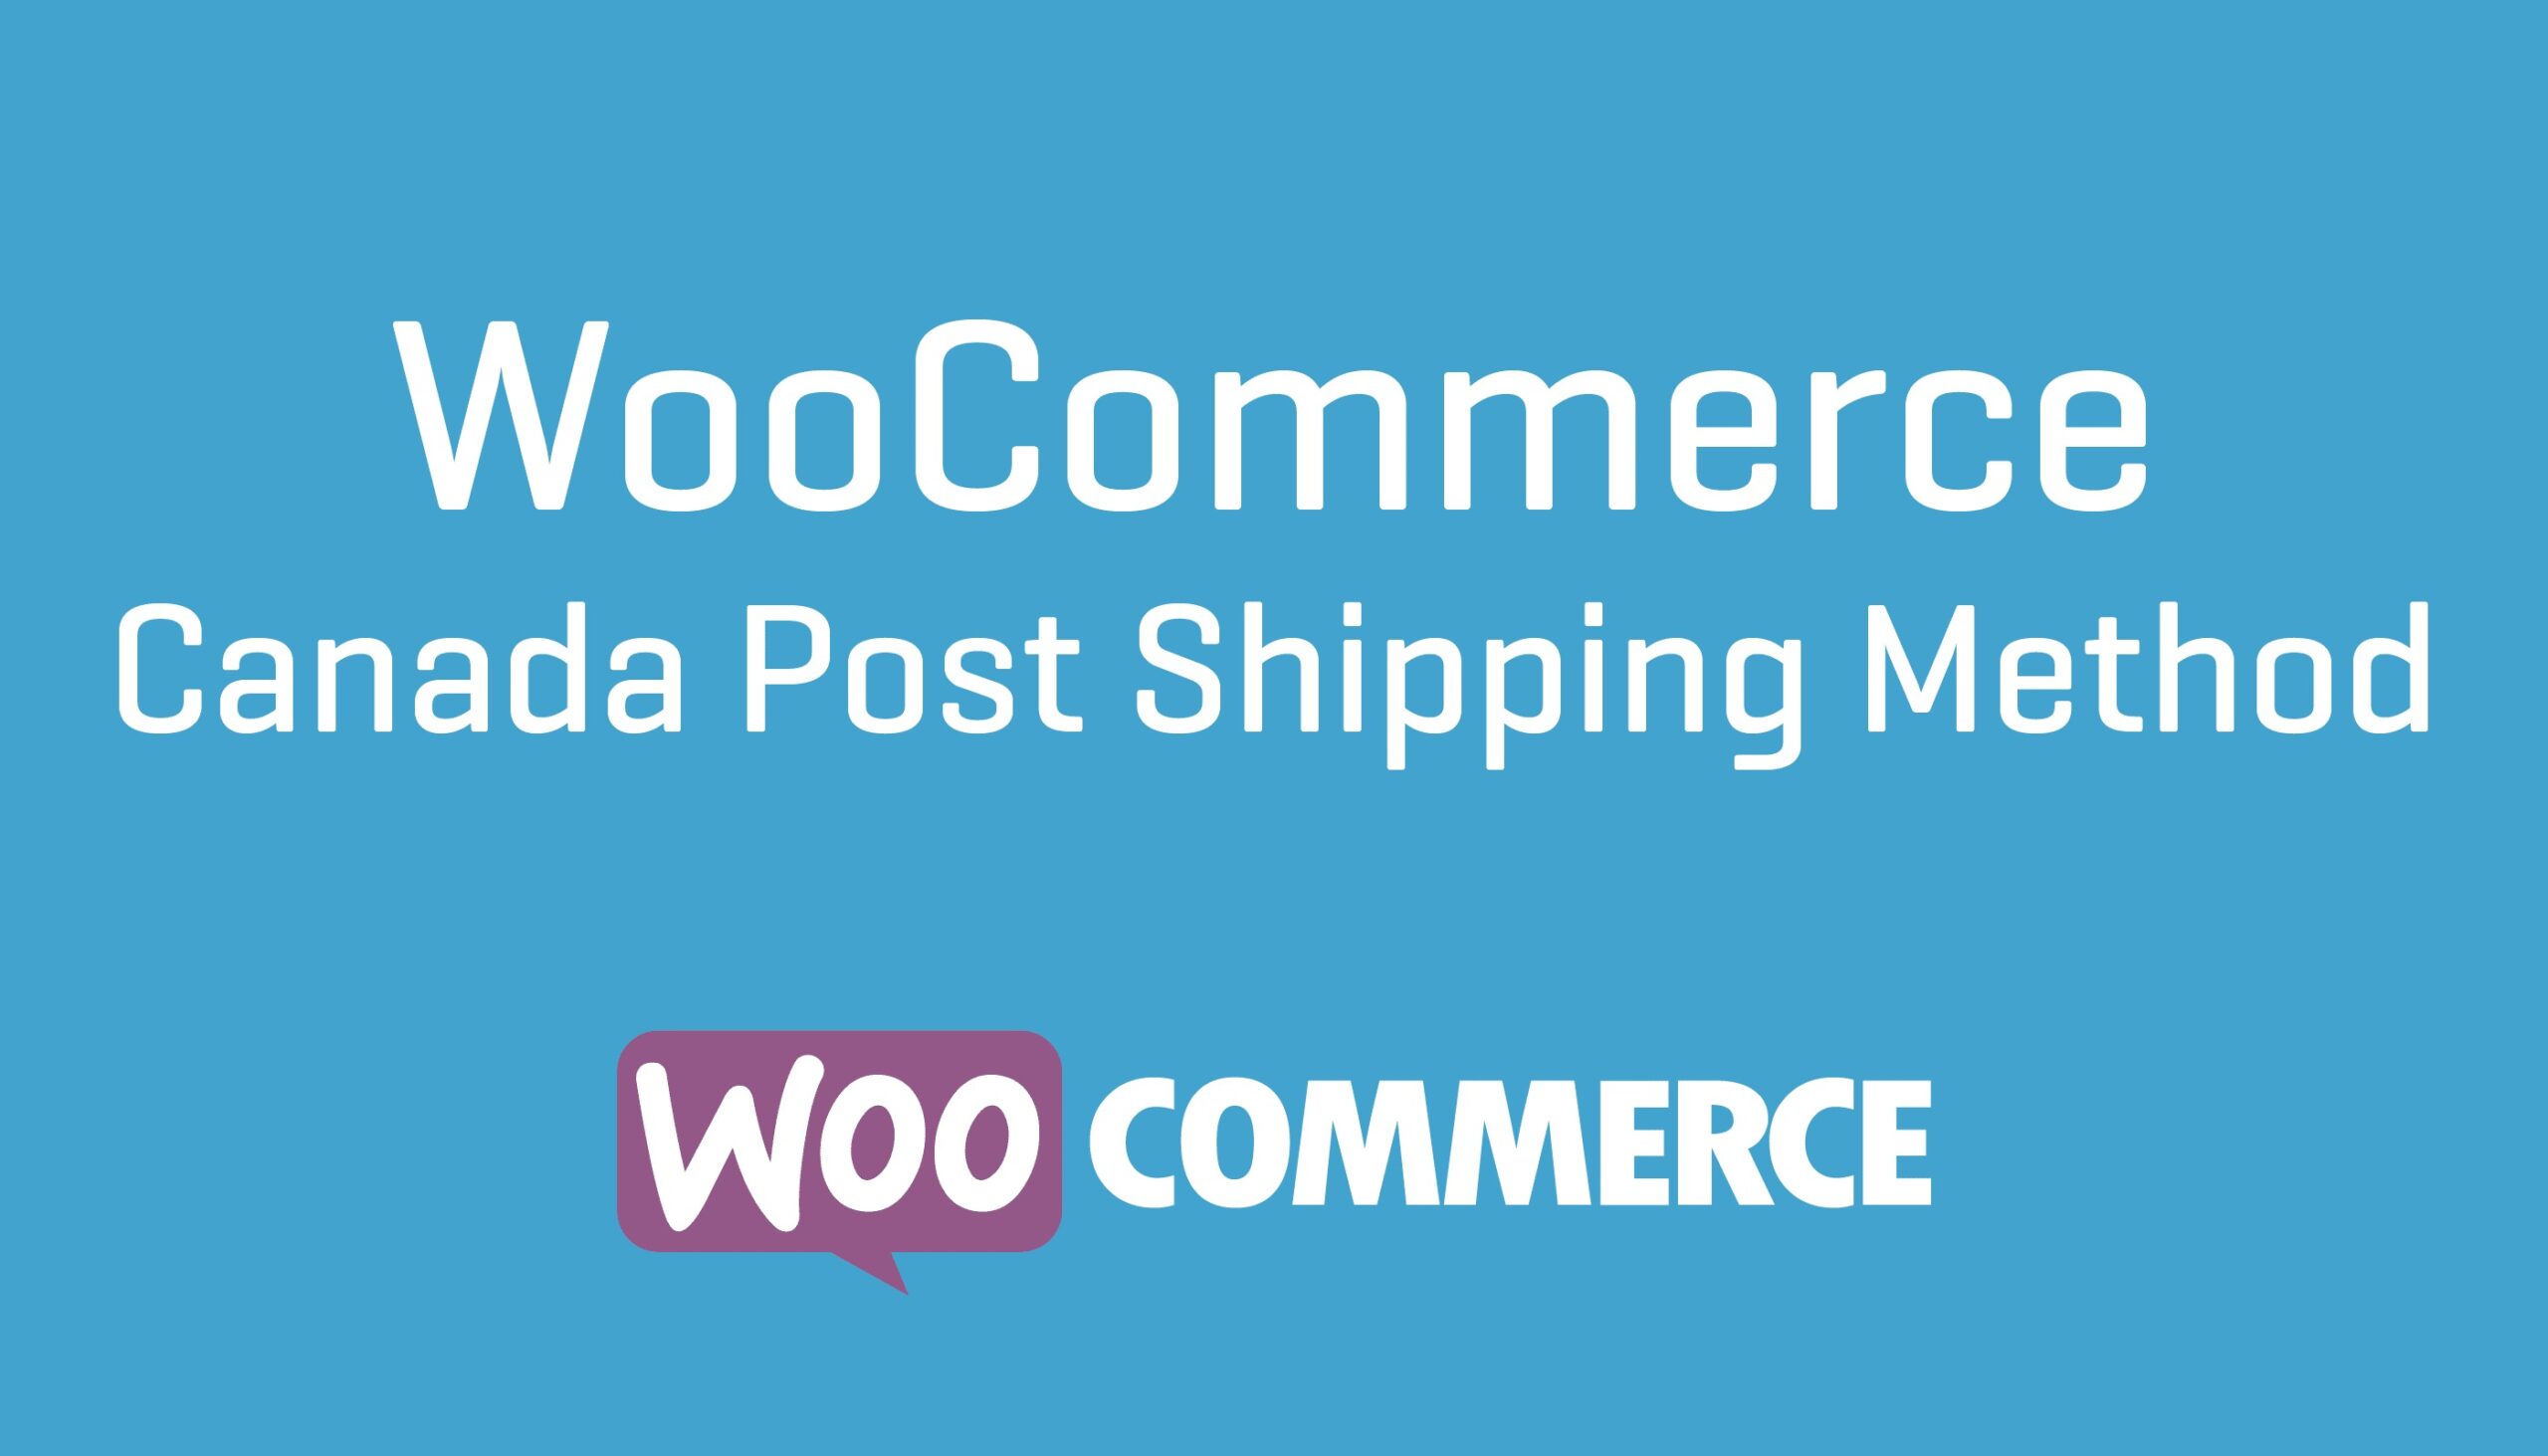 Woocommerce Canada Post Shipping Method - WooCommerce Canada Post Shipping Method v2.9.2 by Woocommerce Nulled Free Download